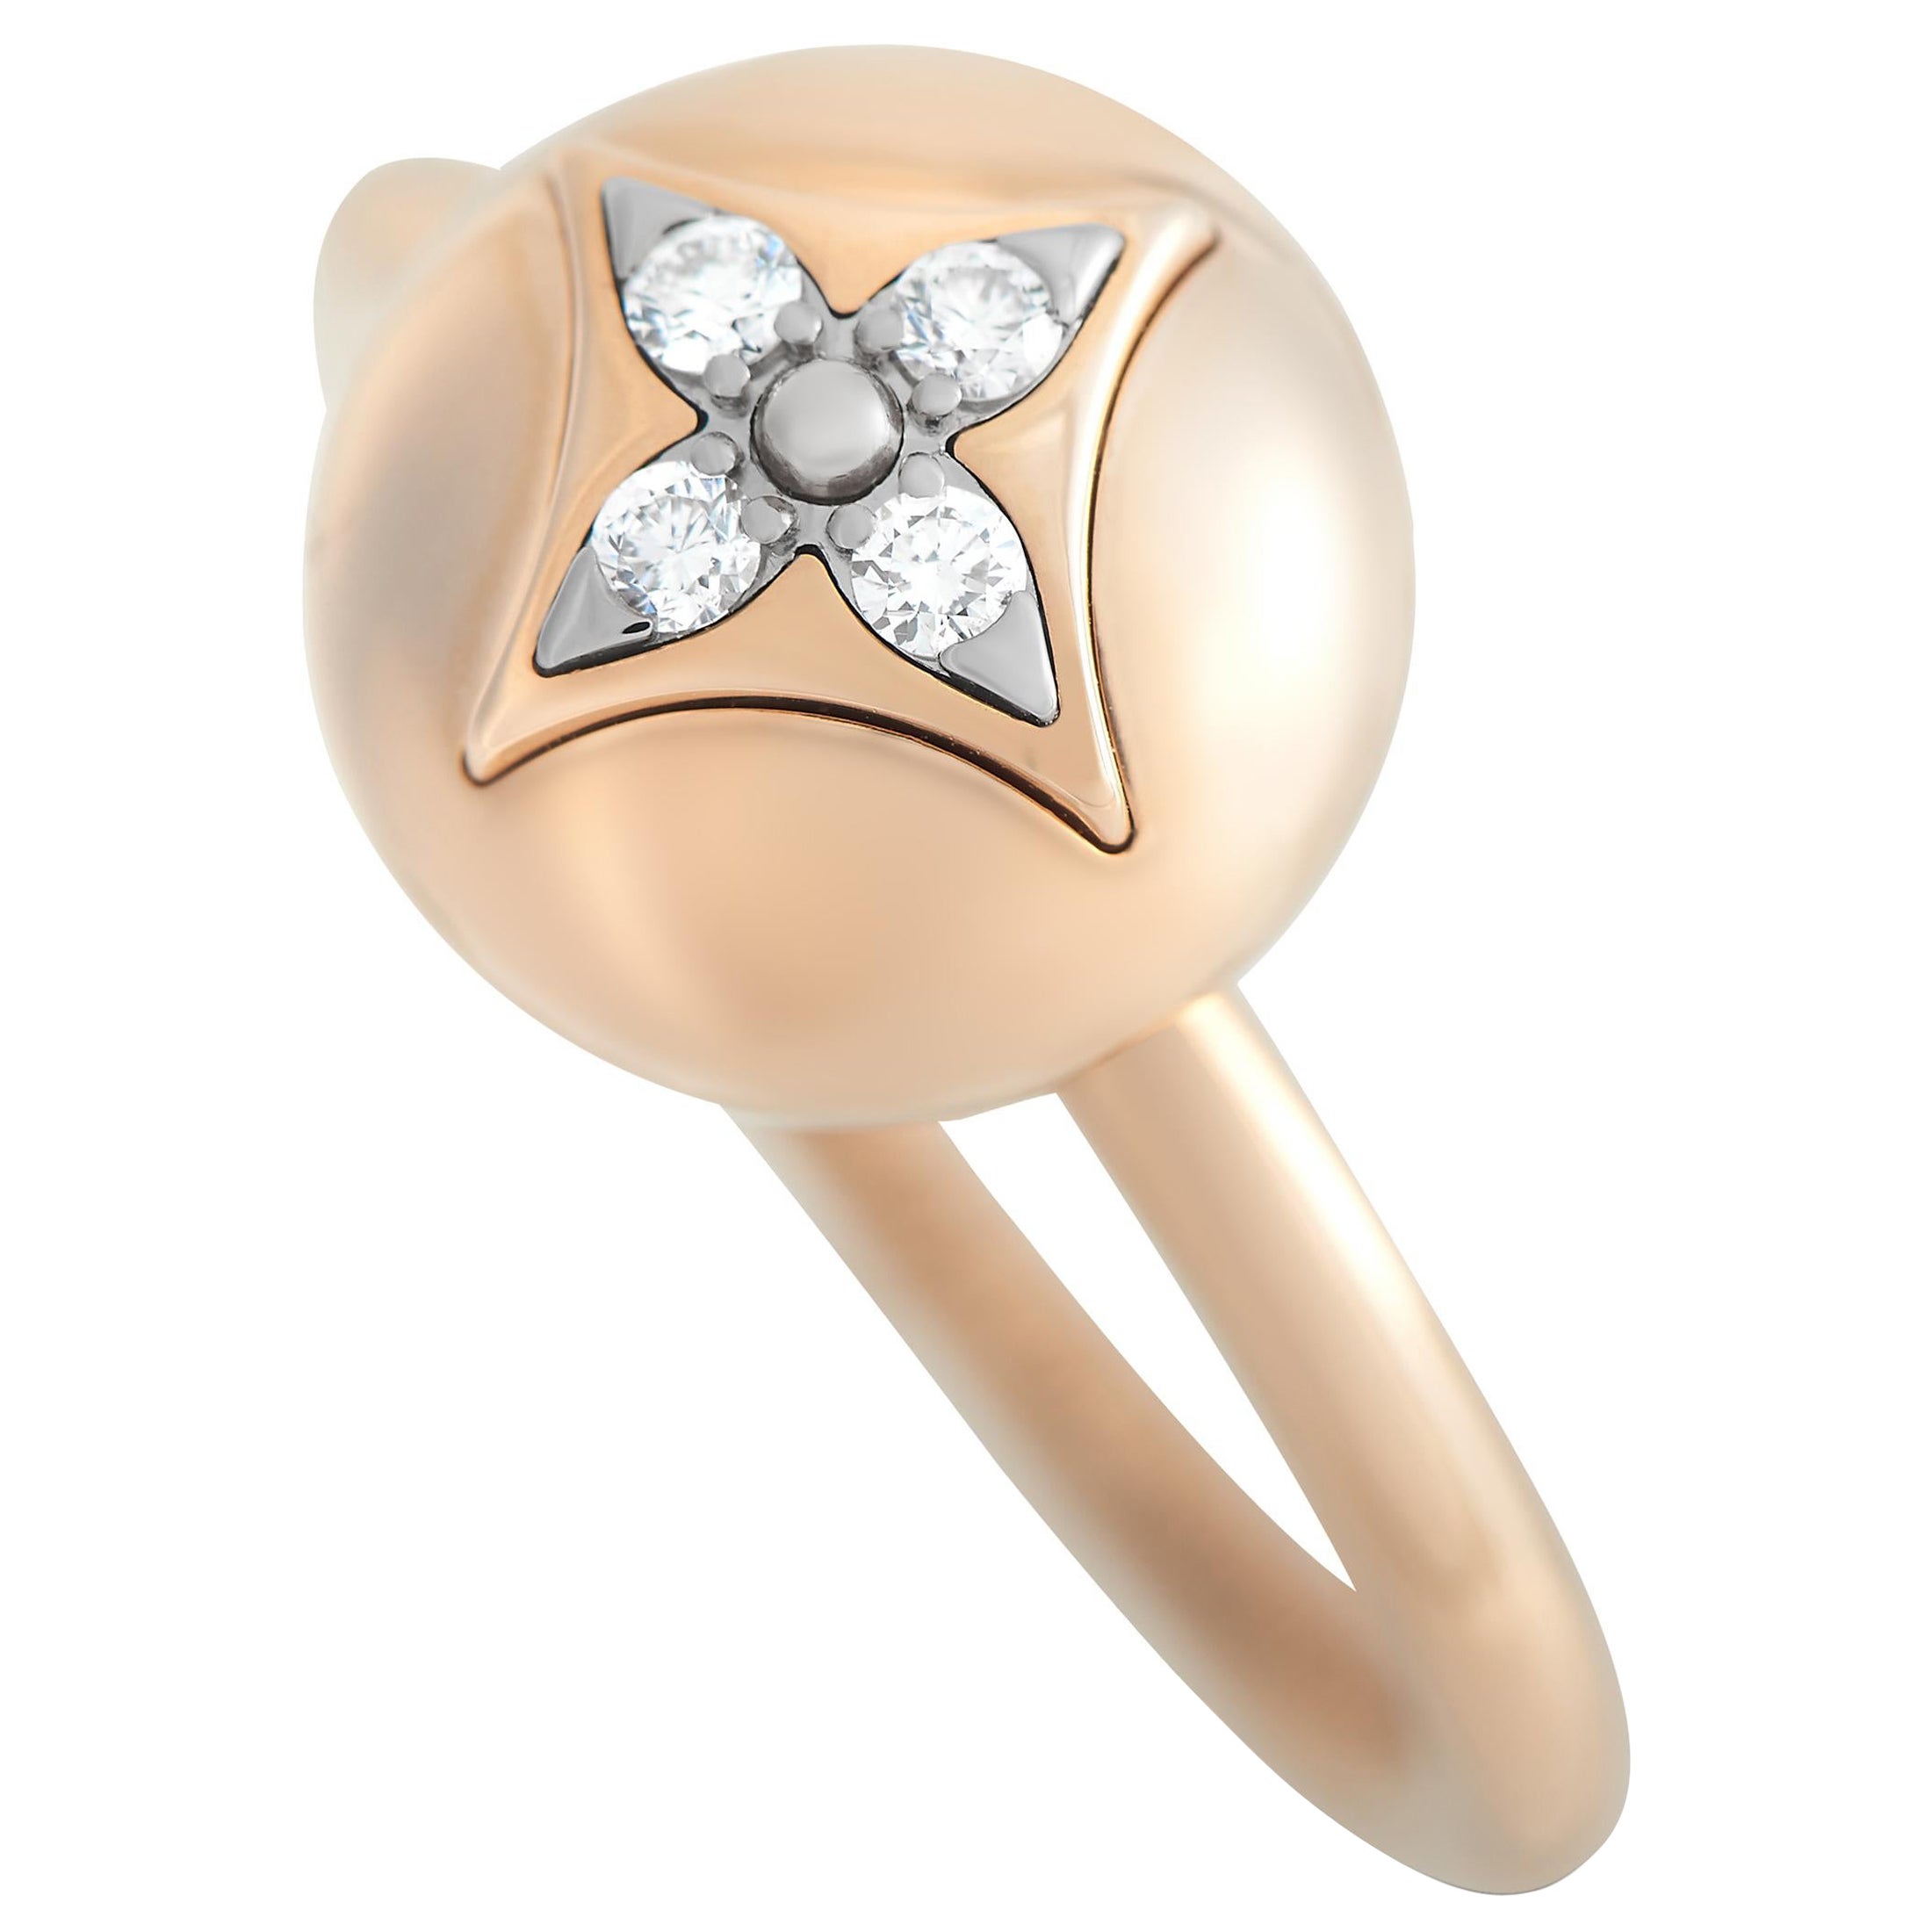 Louis Vuitton Idylle Blossom Two-Row Ring, Pink Gold and Diamonds. Size 55